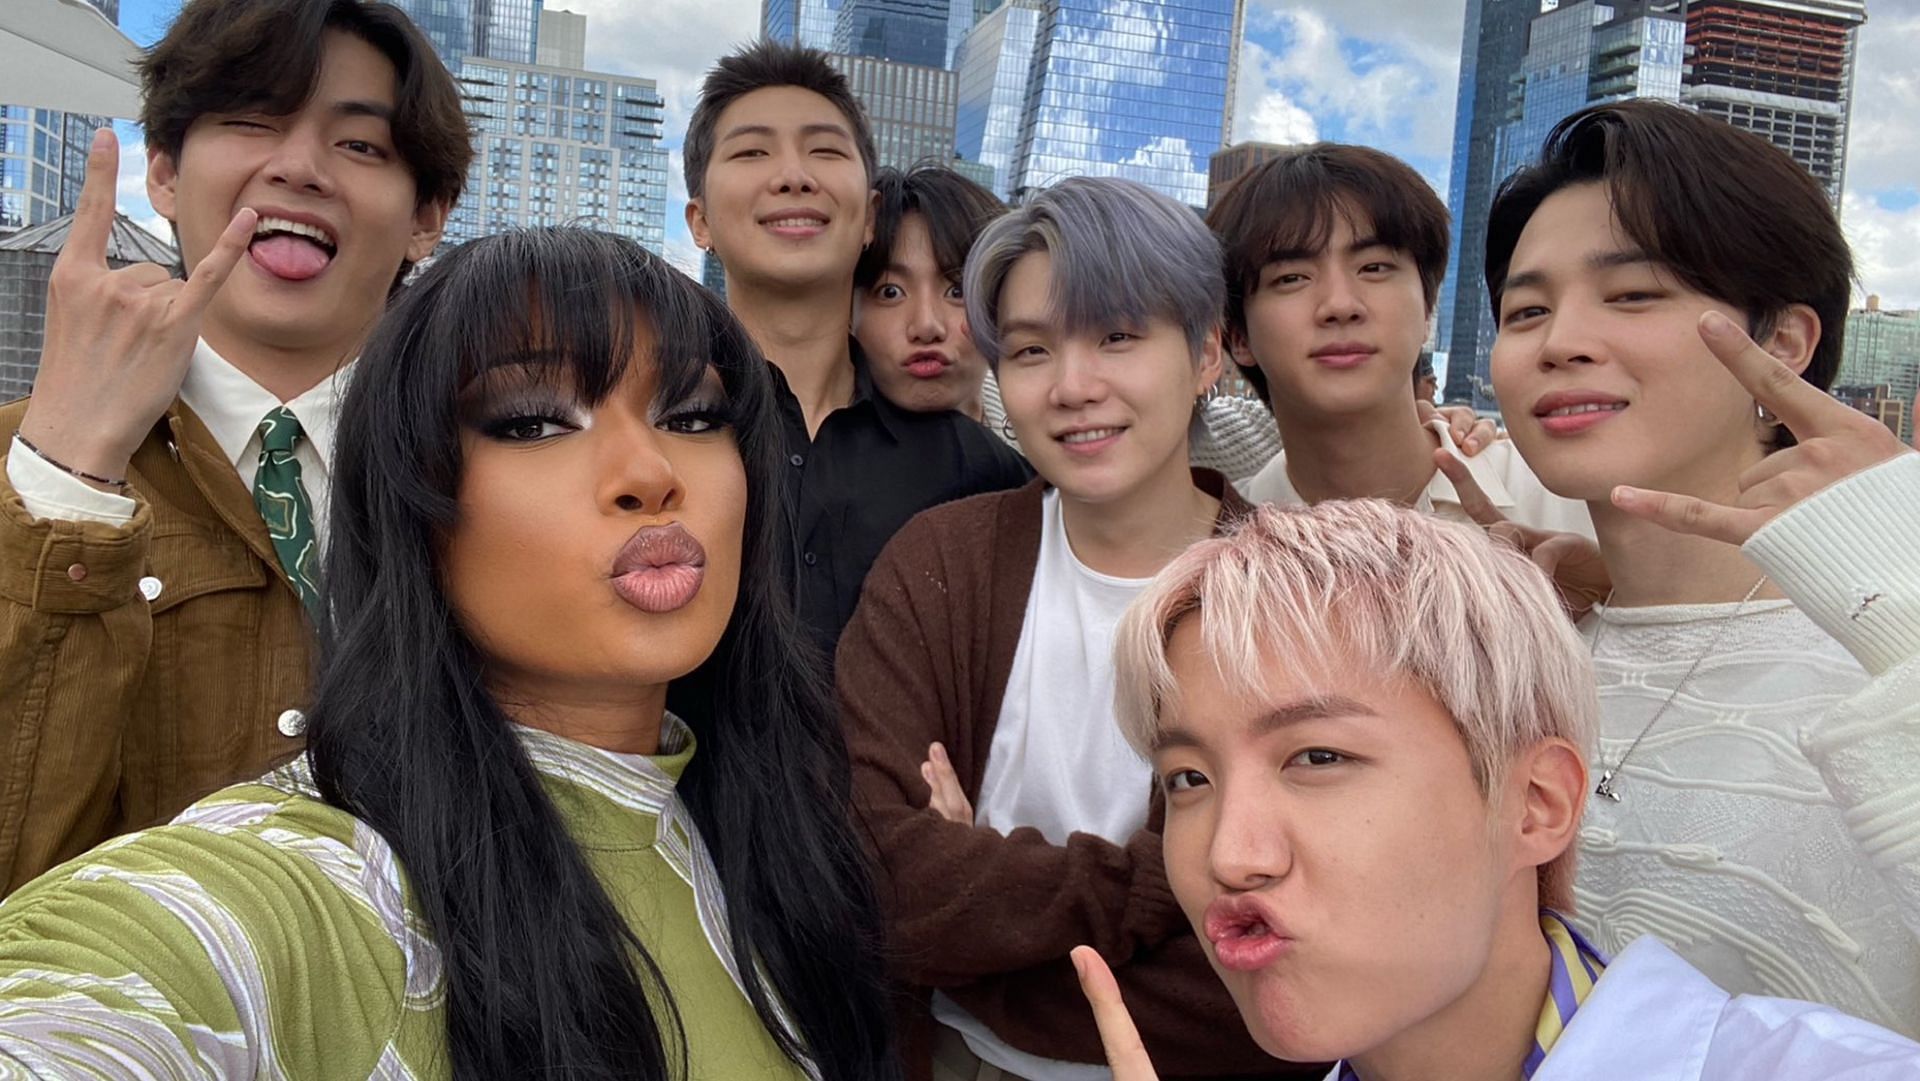 A still of the K-pop group BTS with American singer/rapper Meghan Thee Stallion. (Image via Twitter/@theestallion)